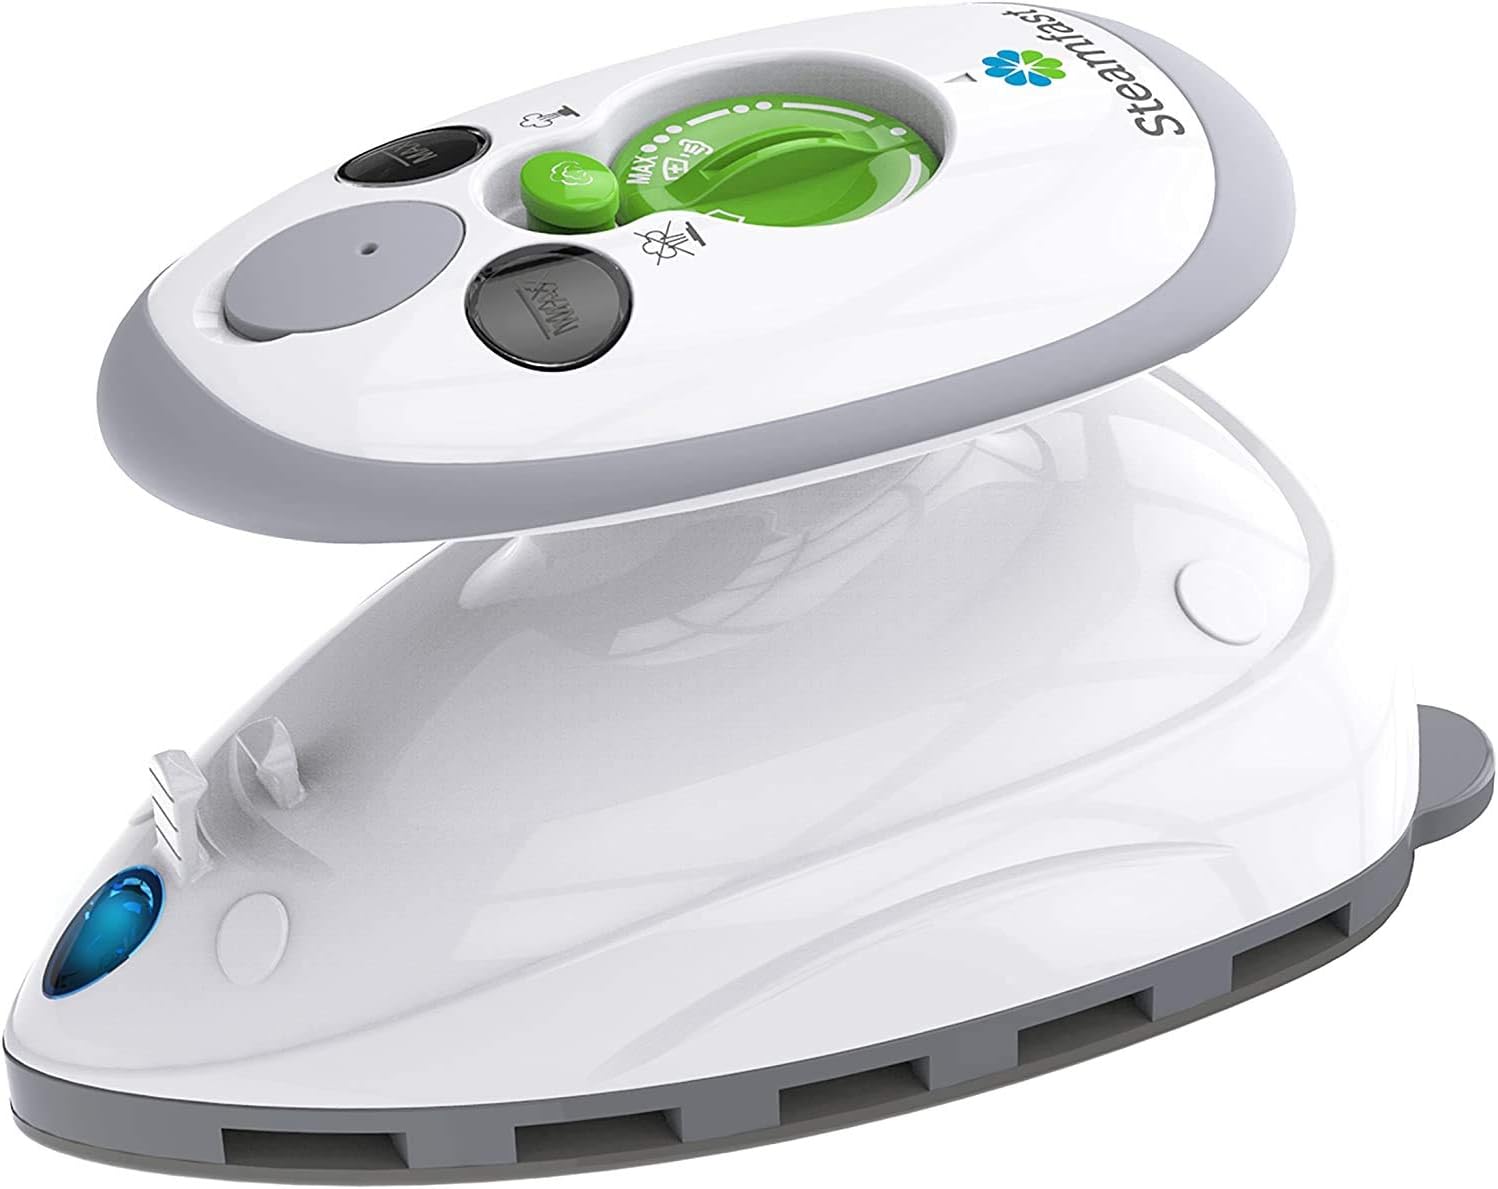 SteamFast Travel Mini Electric Steam Iron sf-727 Review, Specs and Price